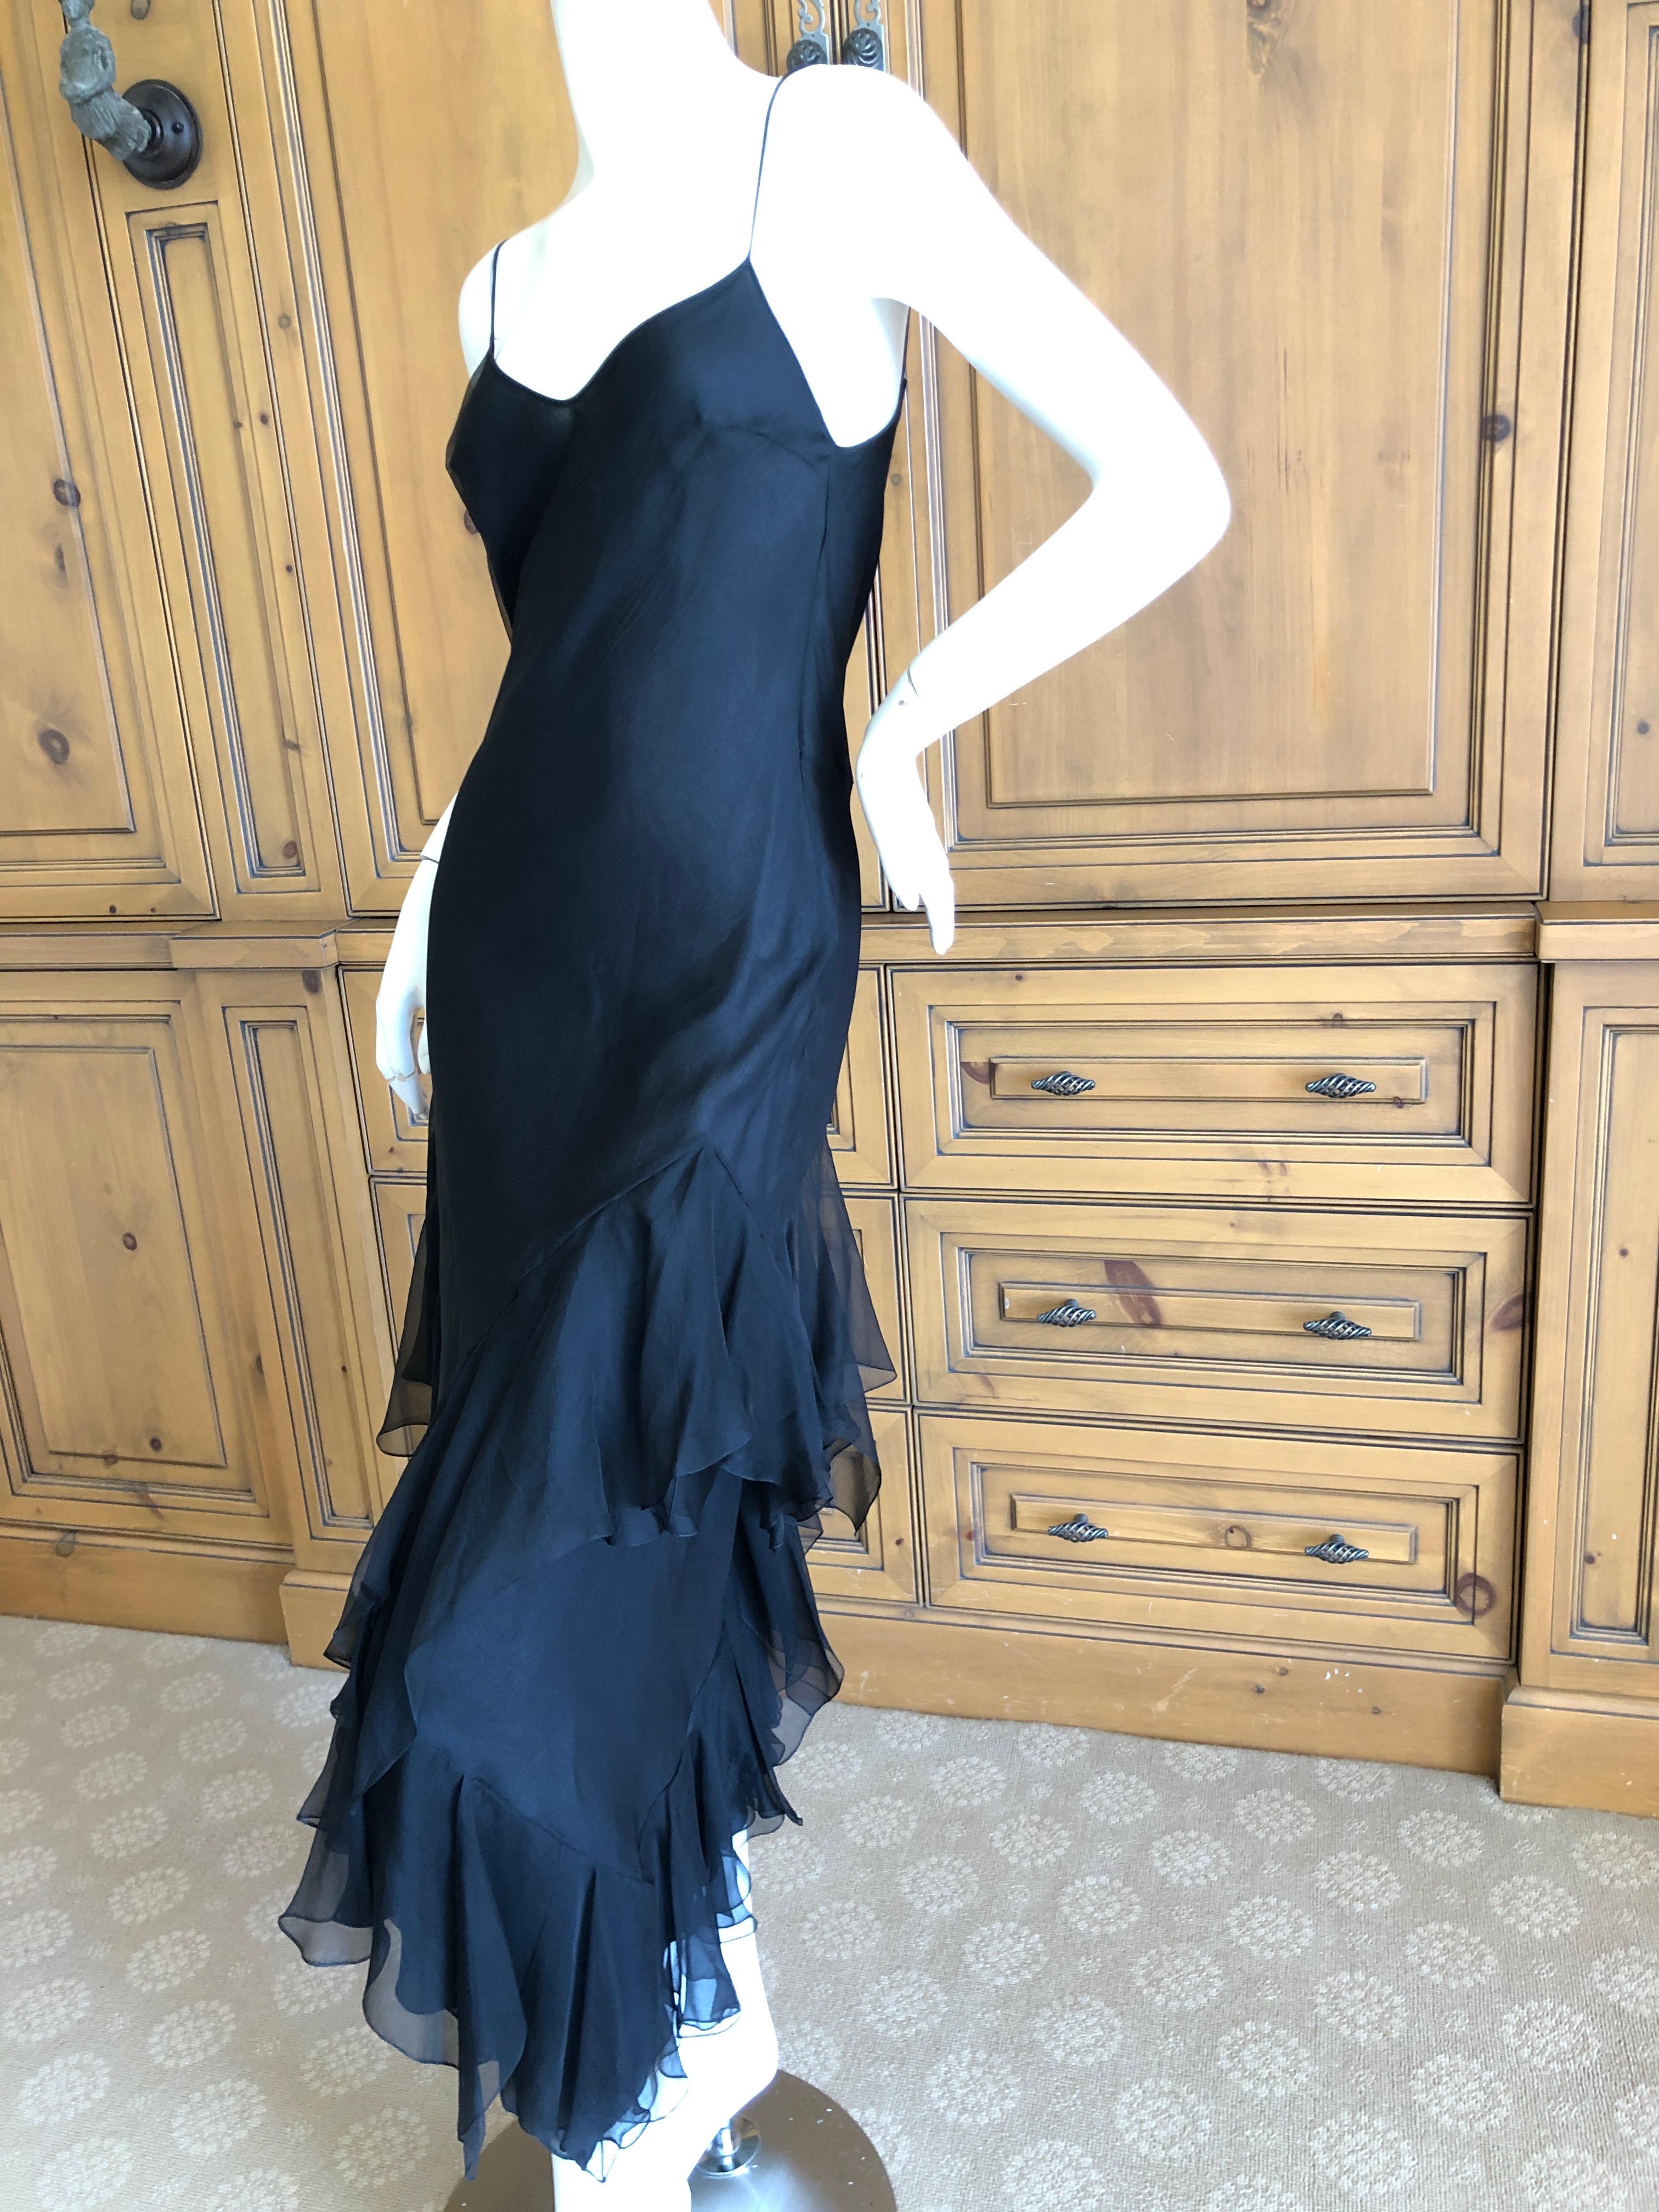 John Galliano 1990's Bias Cut Black Slip Dress with Flamenco Ruffles In Excellent Condition For Sale In Cloverdale, CA